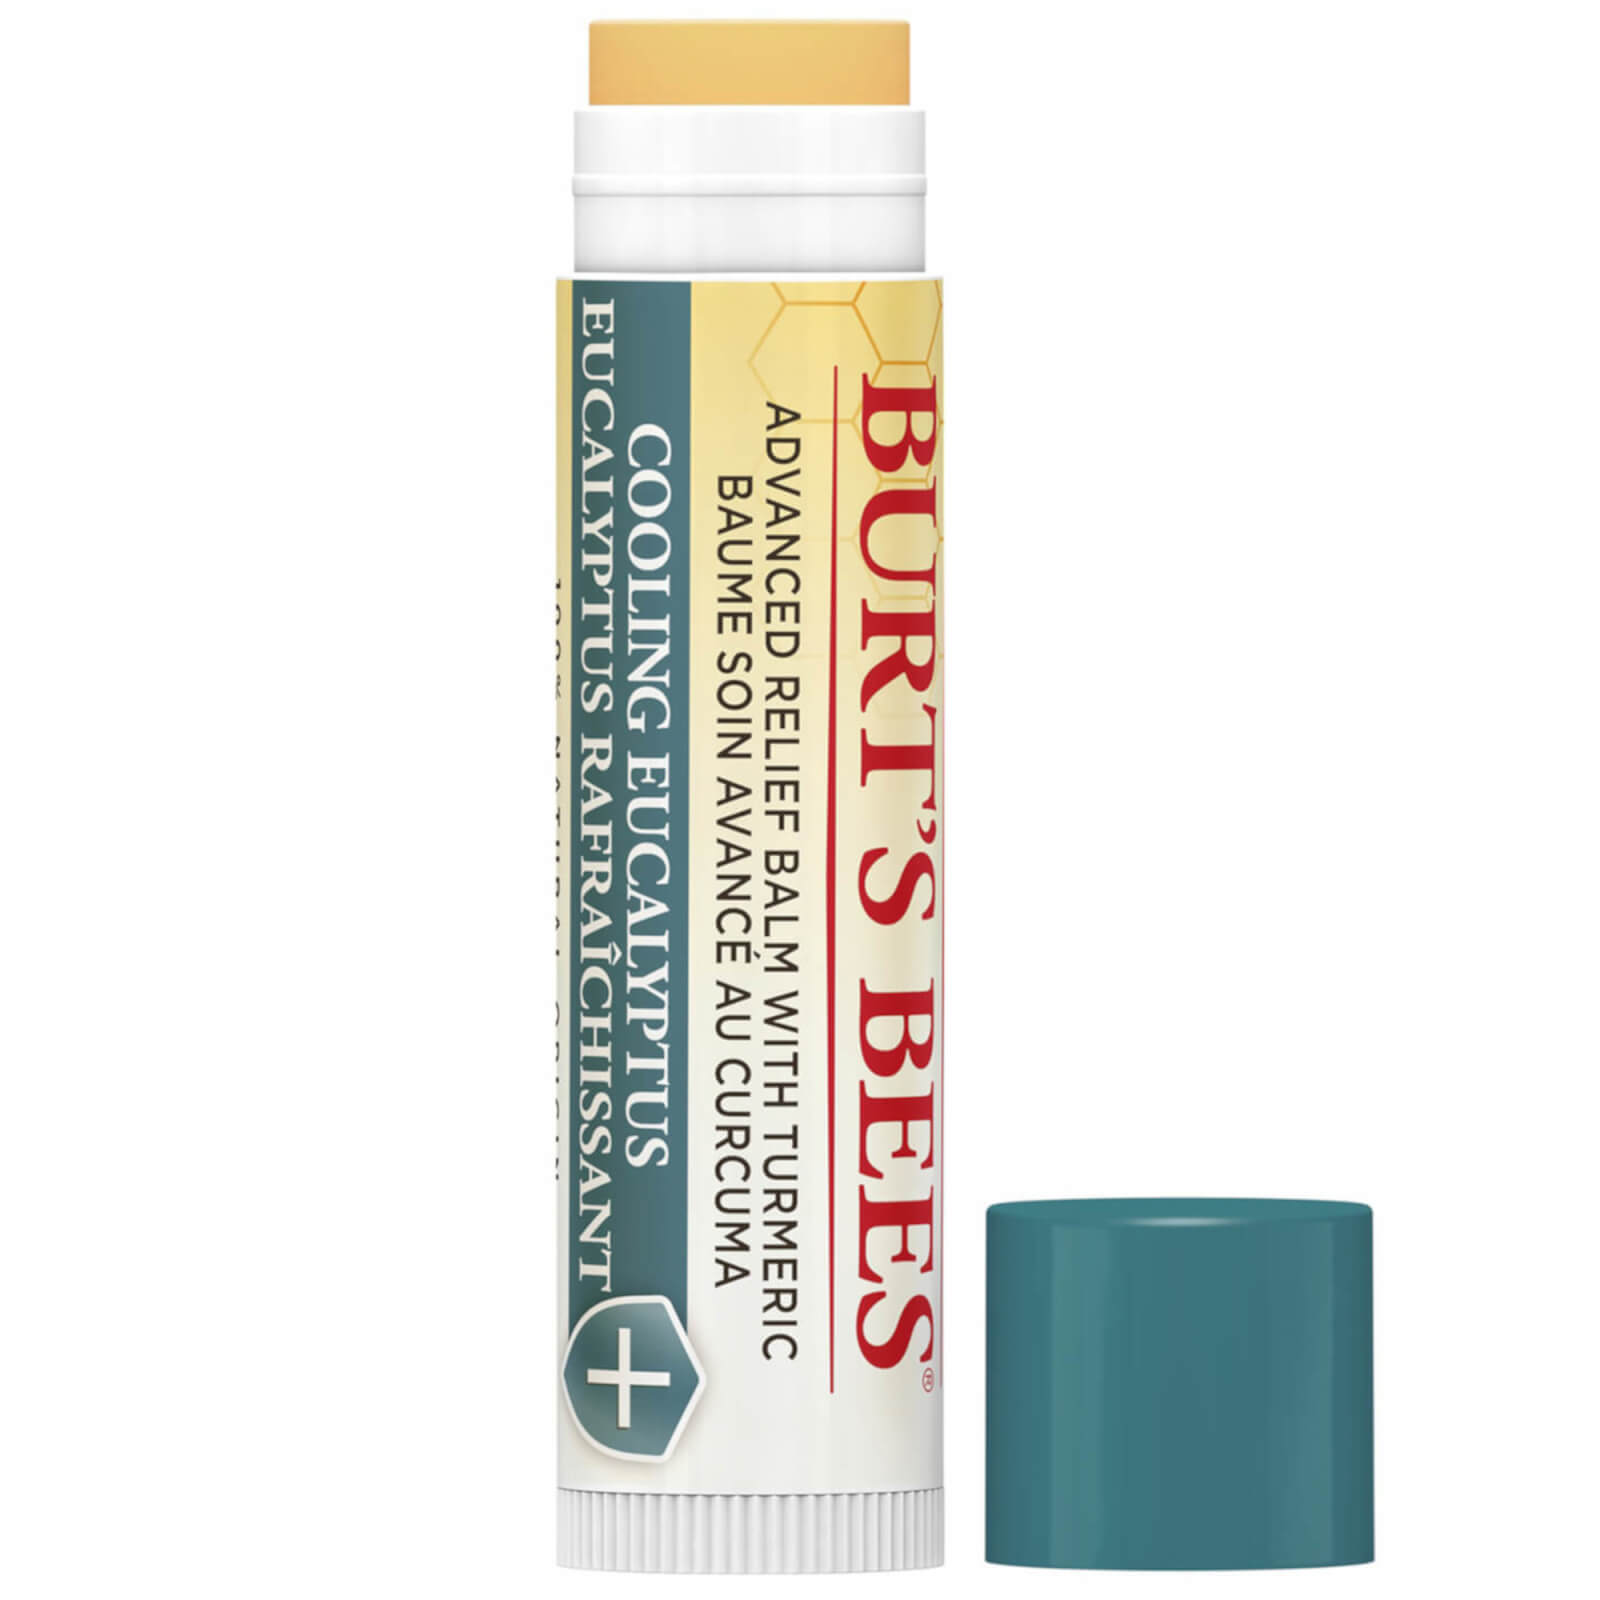 Image of Balsamo Labbra 100% Origine Naturale Advanced Relief for Extremely Dry Lips, Cooling Eucalyptus Burt's Bees